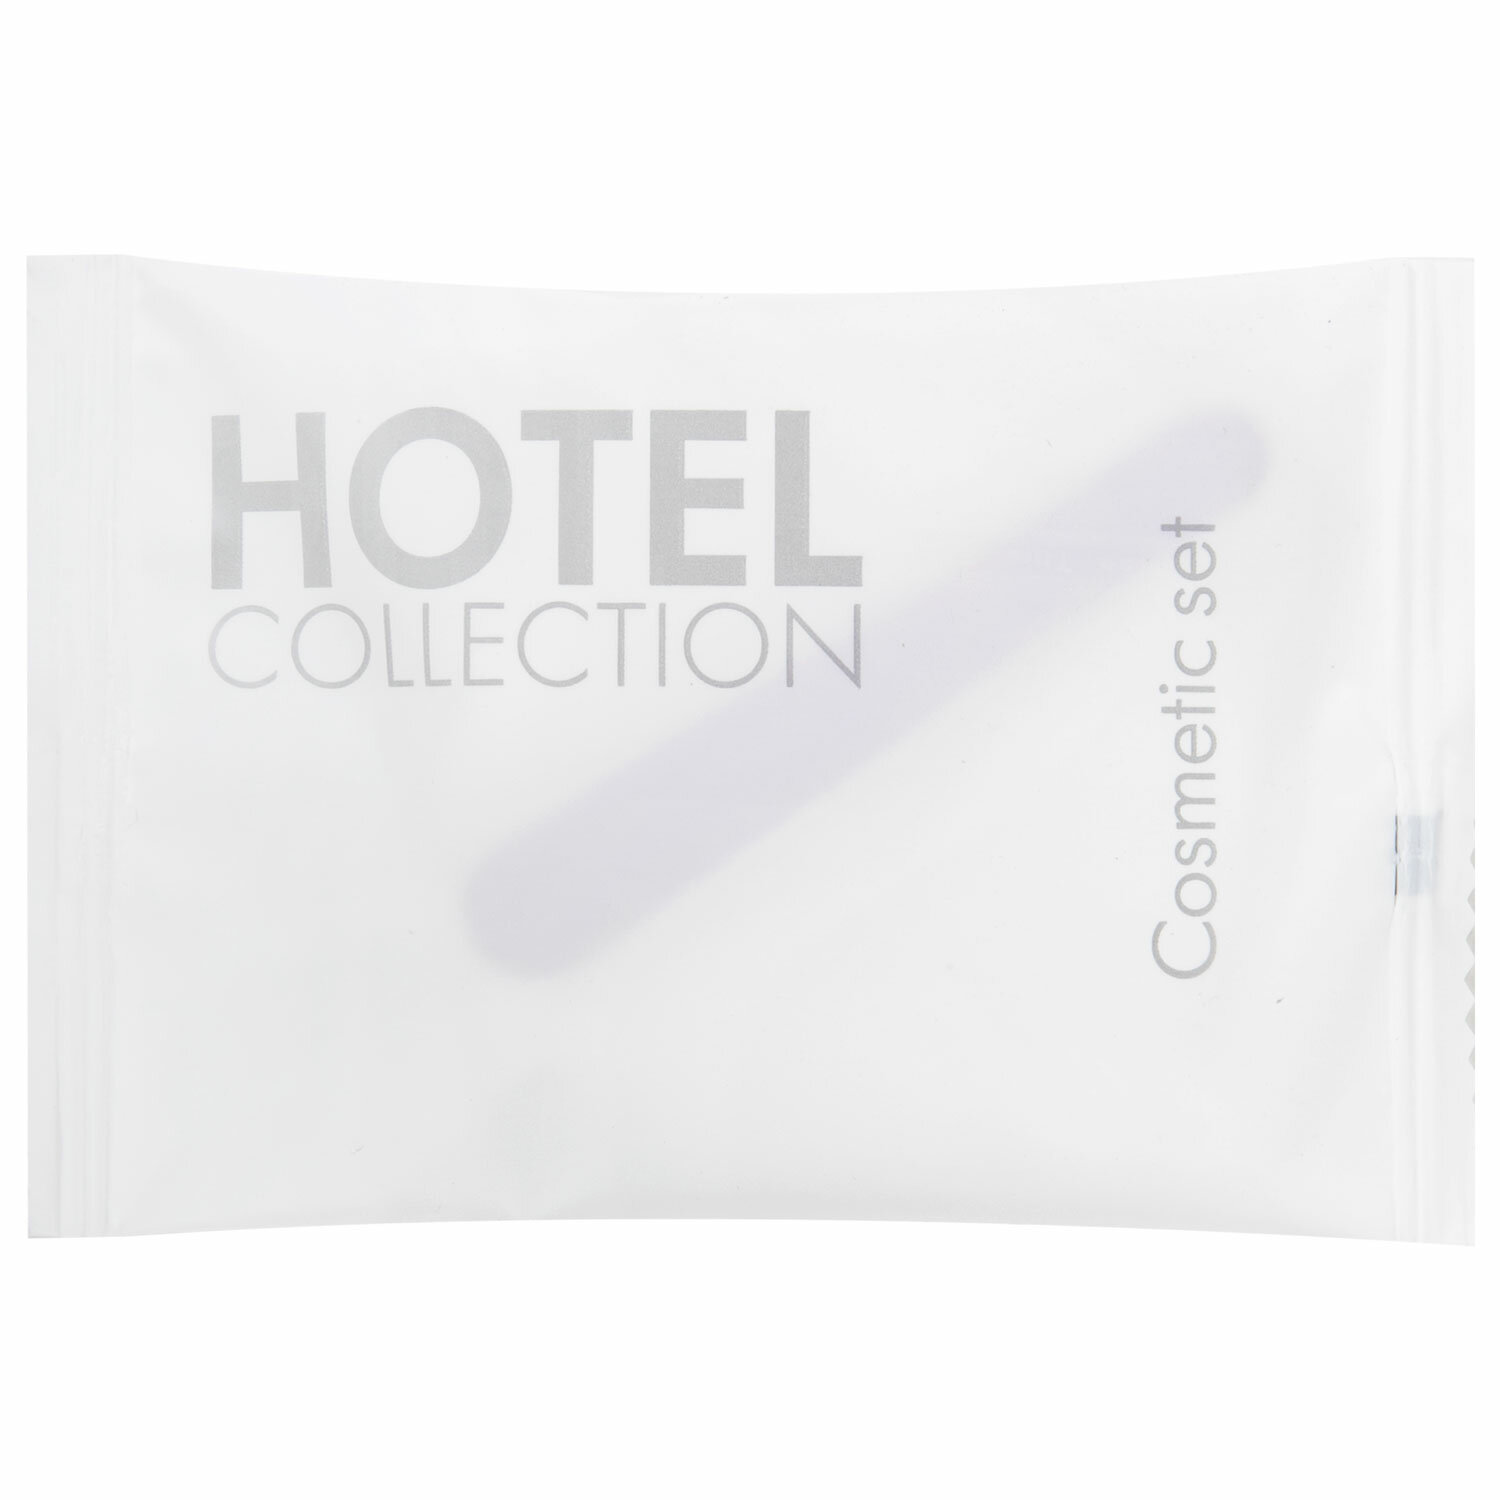  HOTEL COLLECTION 2000311